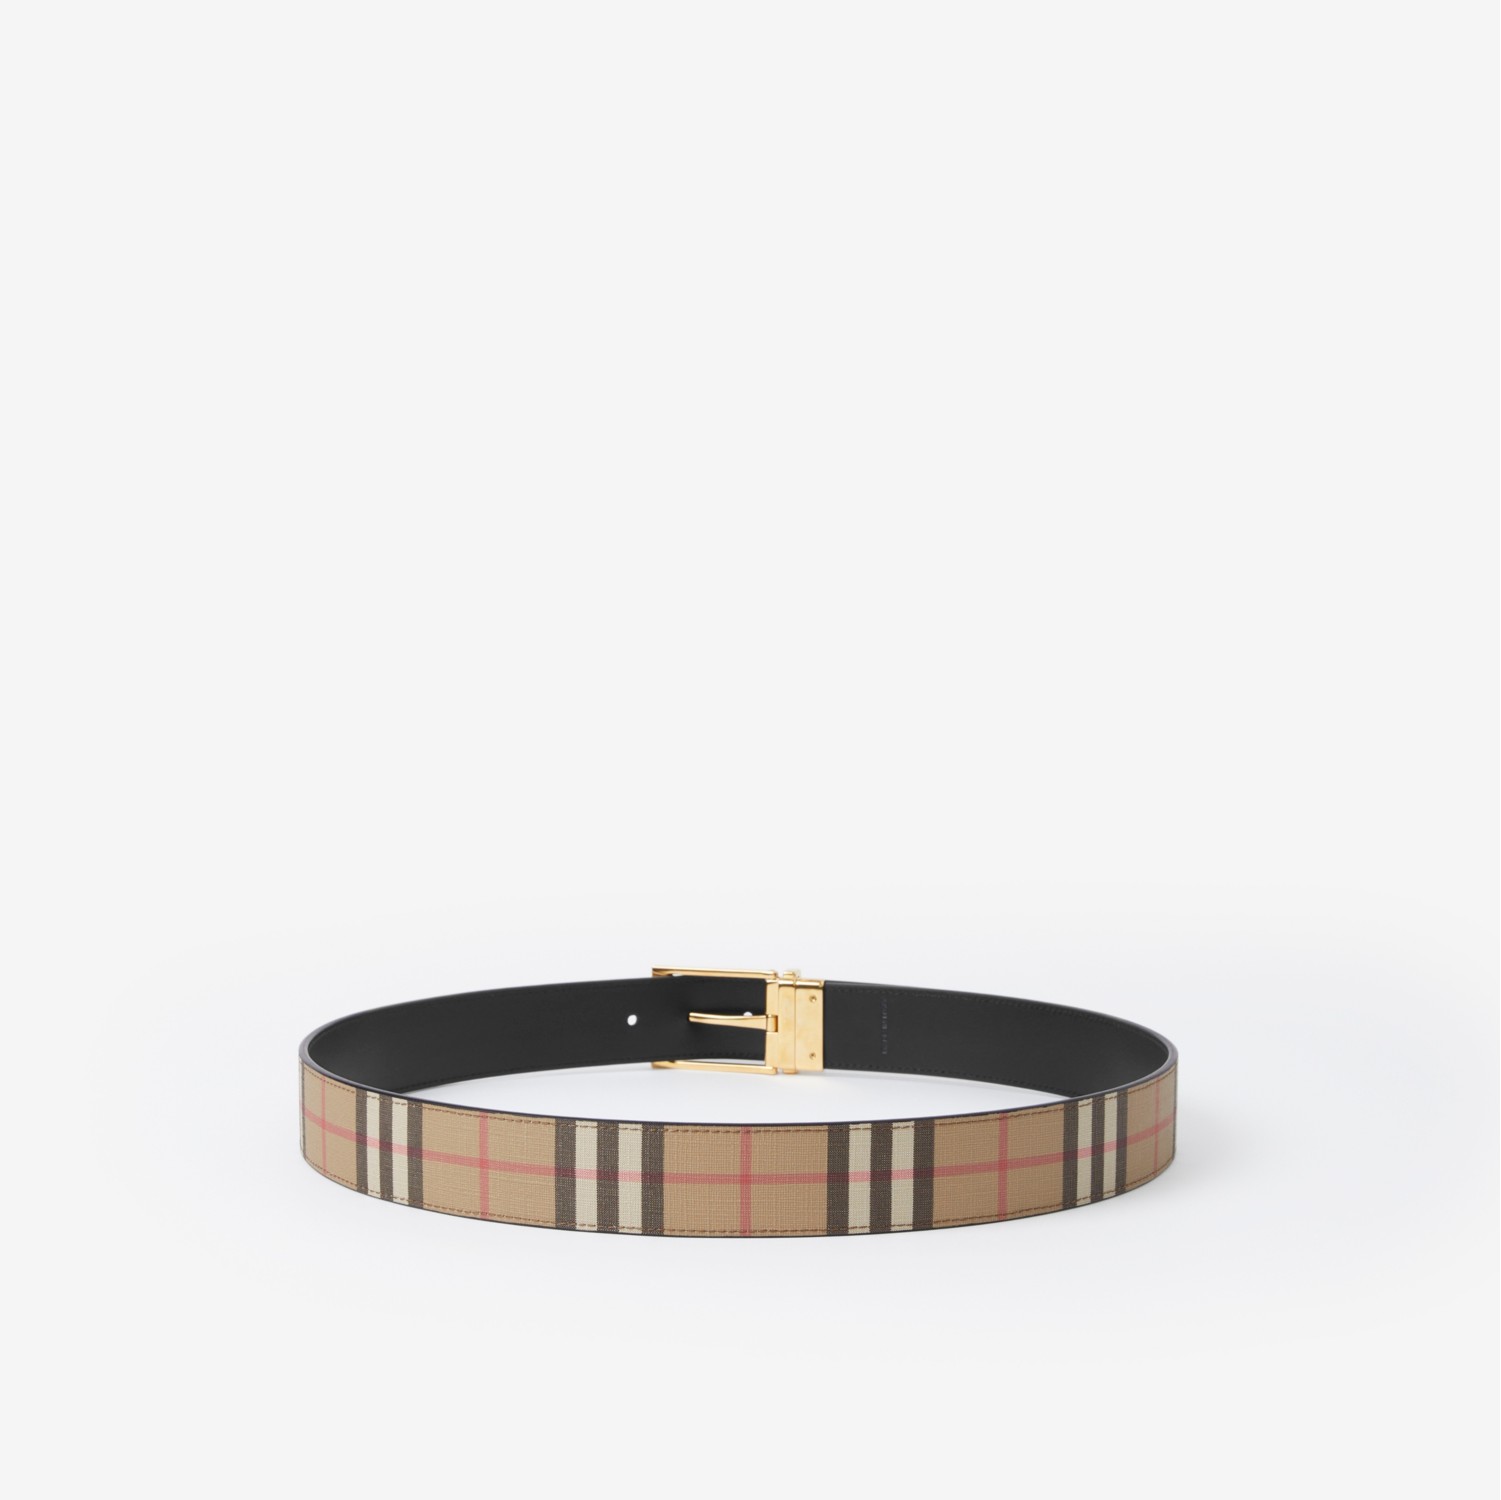 Reversible Vintage Check and Leather Belt in Archive beige/gold